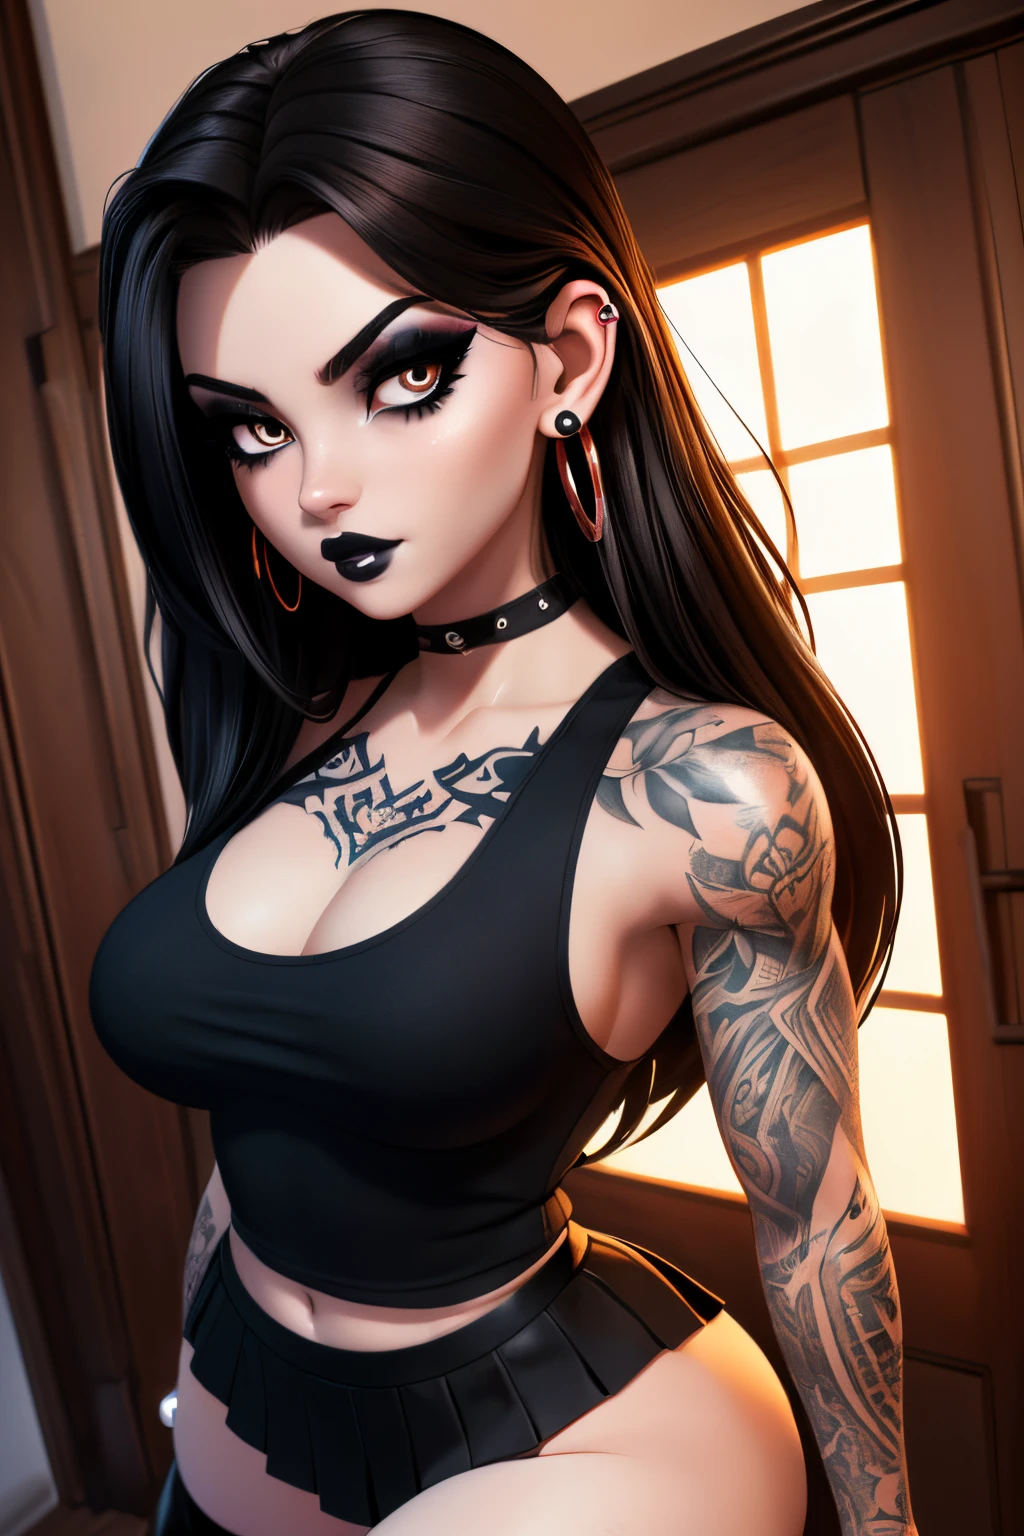 ((ultra quality)), ((tmasterpiece)), goth girl, ((long black hair), ((there are piercings and rings in the ears)), Beautiful cute face, beautiful female lips, ((dark makeup)), charming beauty, ((sexy facial expression)), is looking at the camera, ((Skin color: white)), ((have tattoos on the body)), Body glare, ((detailed beautiful female eyes)), ((dark brown eyes)), beautiful female hands, ((perfect female figure)), ideal female body shapes, Beautiful waist, nice feet, big thighs, Beautiful butt, ((Subtle and beautiful)), seductively worth it ((closeup face)), ((wearing a black miniskirt and a black sleeveless tank top, black boots with a large platform, black stockings)), background: Threshold of the house, evening sunset, ((Depth of field)), ((high quality clear image)), ((crisp details)), ((higly detailed)), Realistic, Professional Photo Session, ((Clear Focus)), ((cartoon)), the anime, NSFW